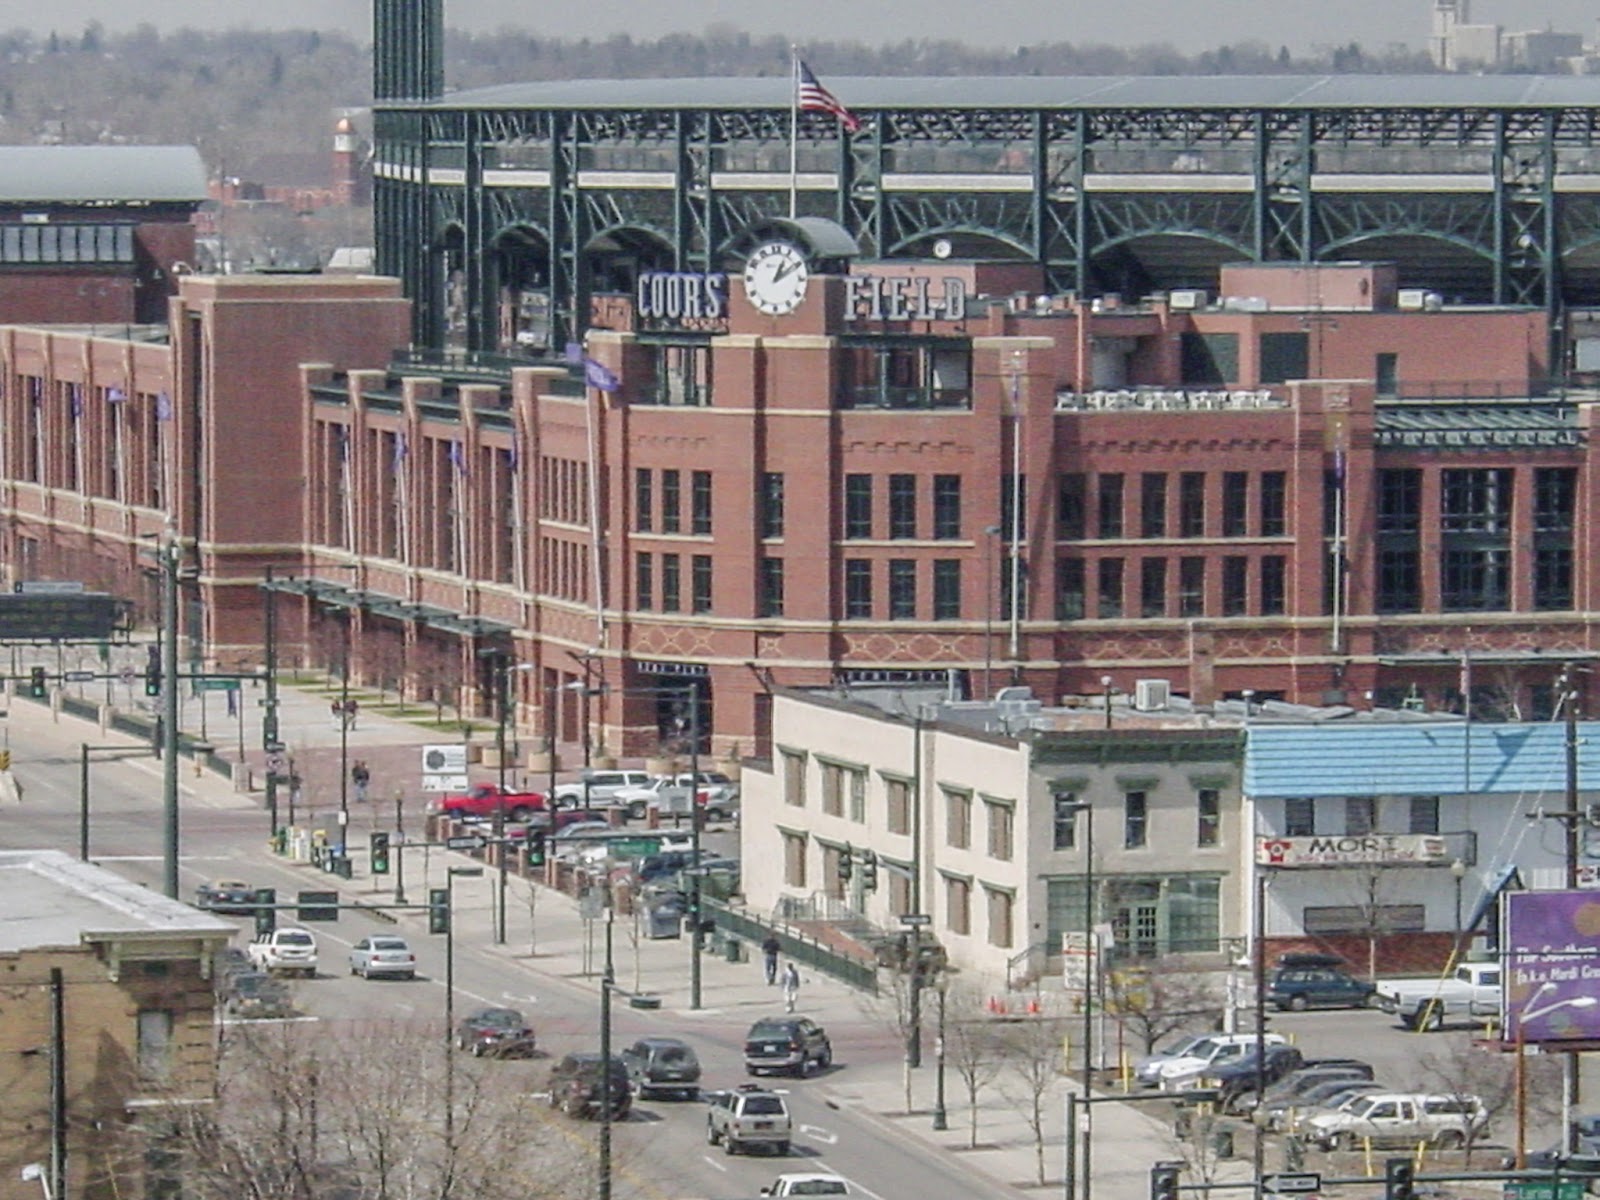 2002 view of Coors Field